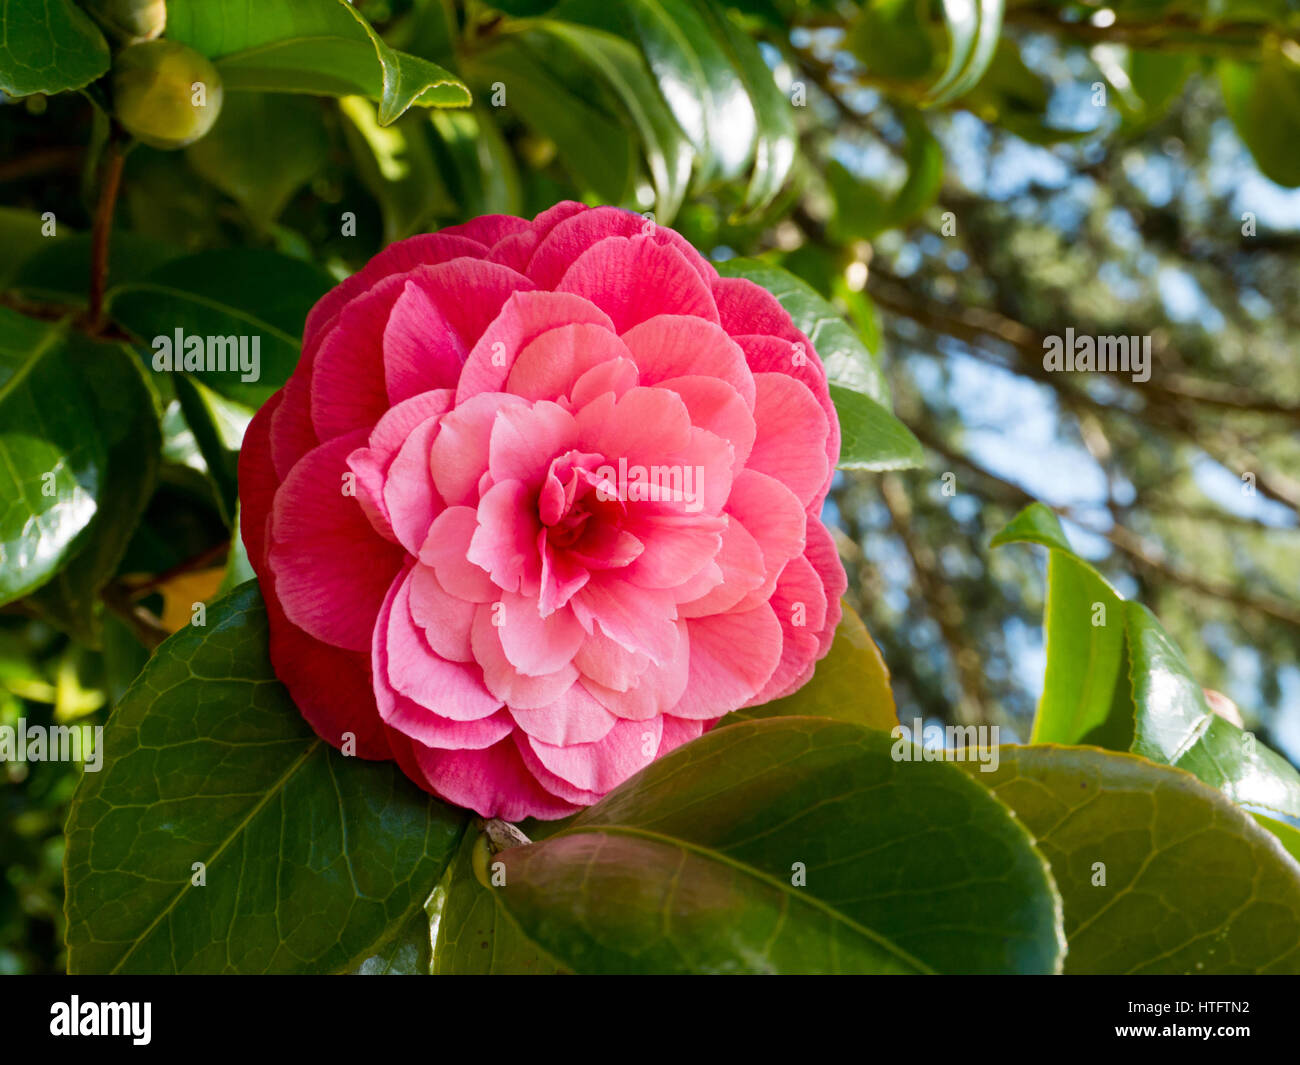 Pink camellia flower in the garden Stock Photo